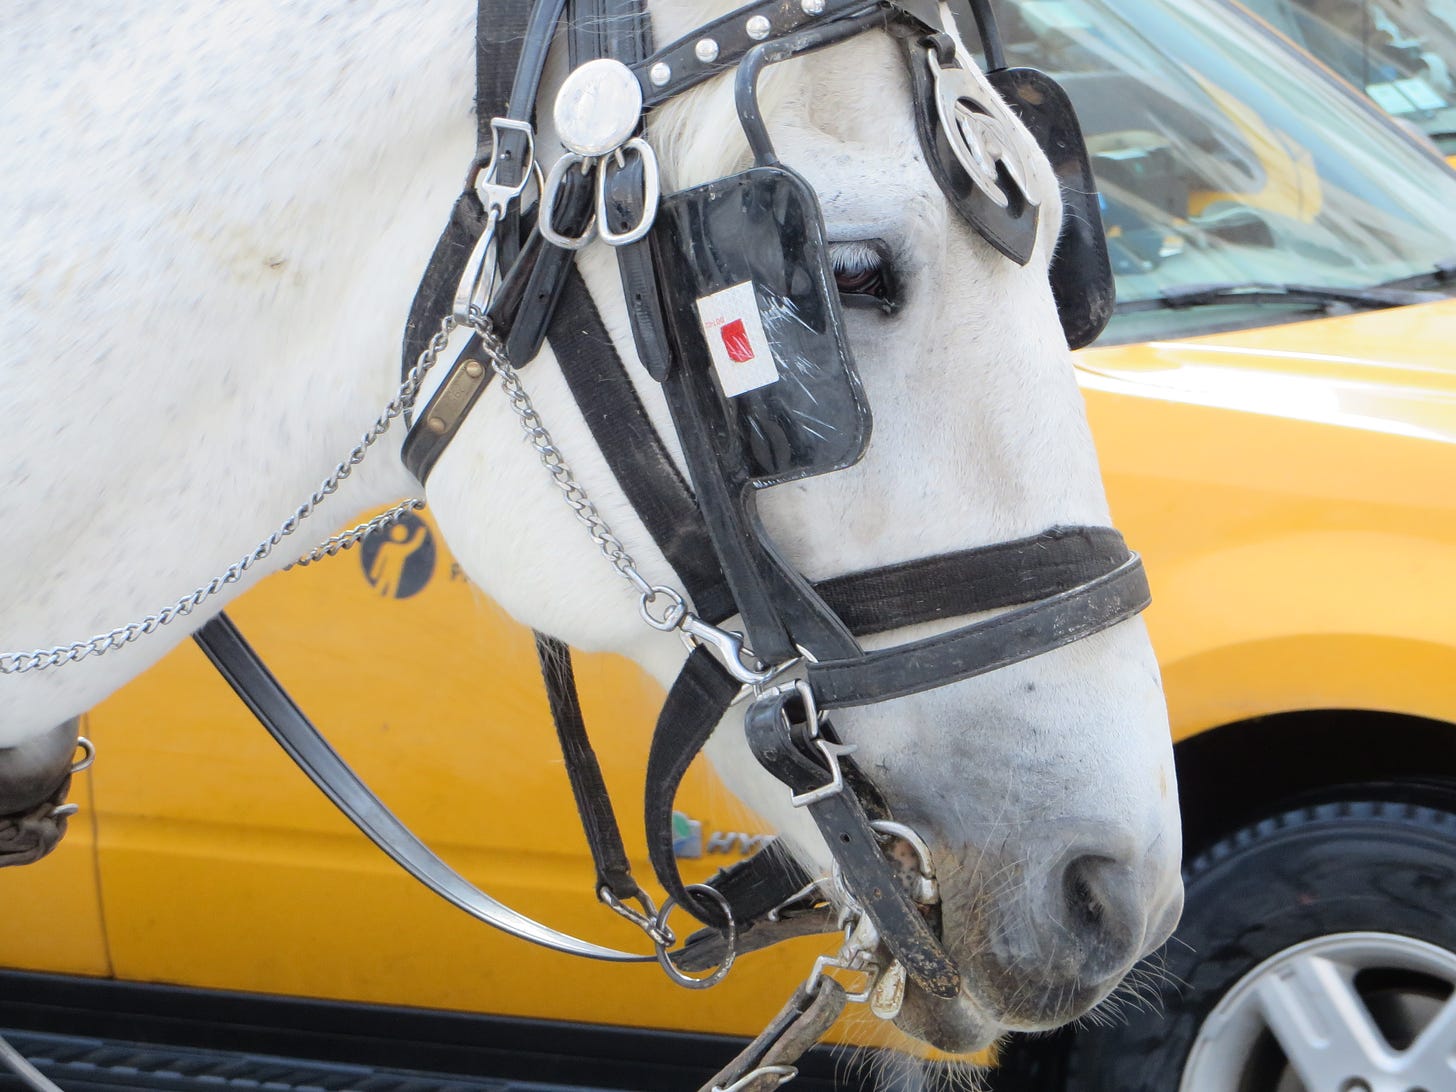 8 Reasons Why Horse-Drawn Carriages Cannot Be Operated Humanely or Safely  in NYC - Their Turn